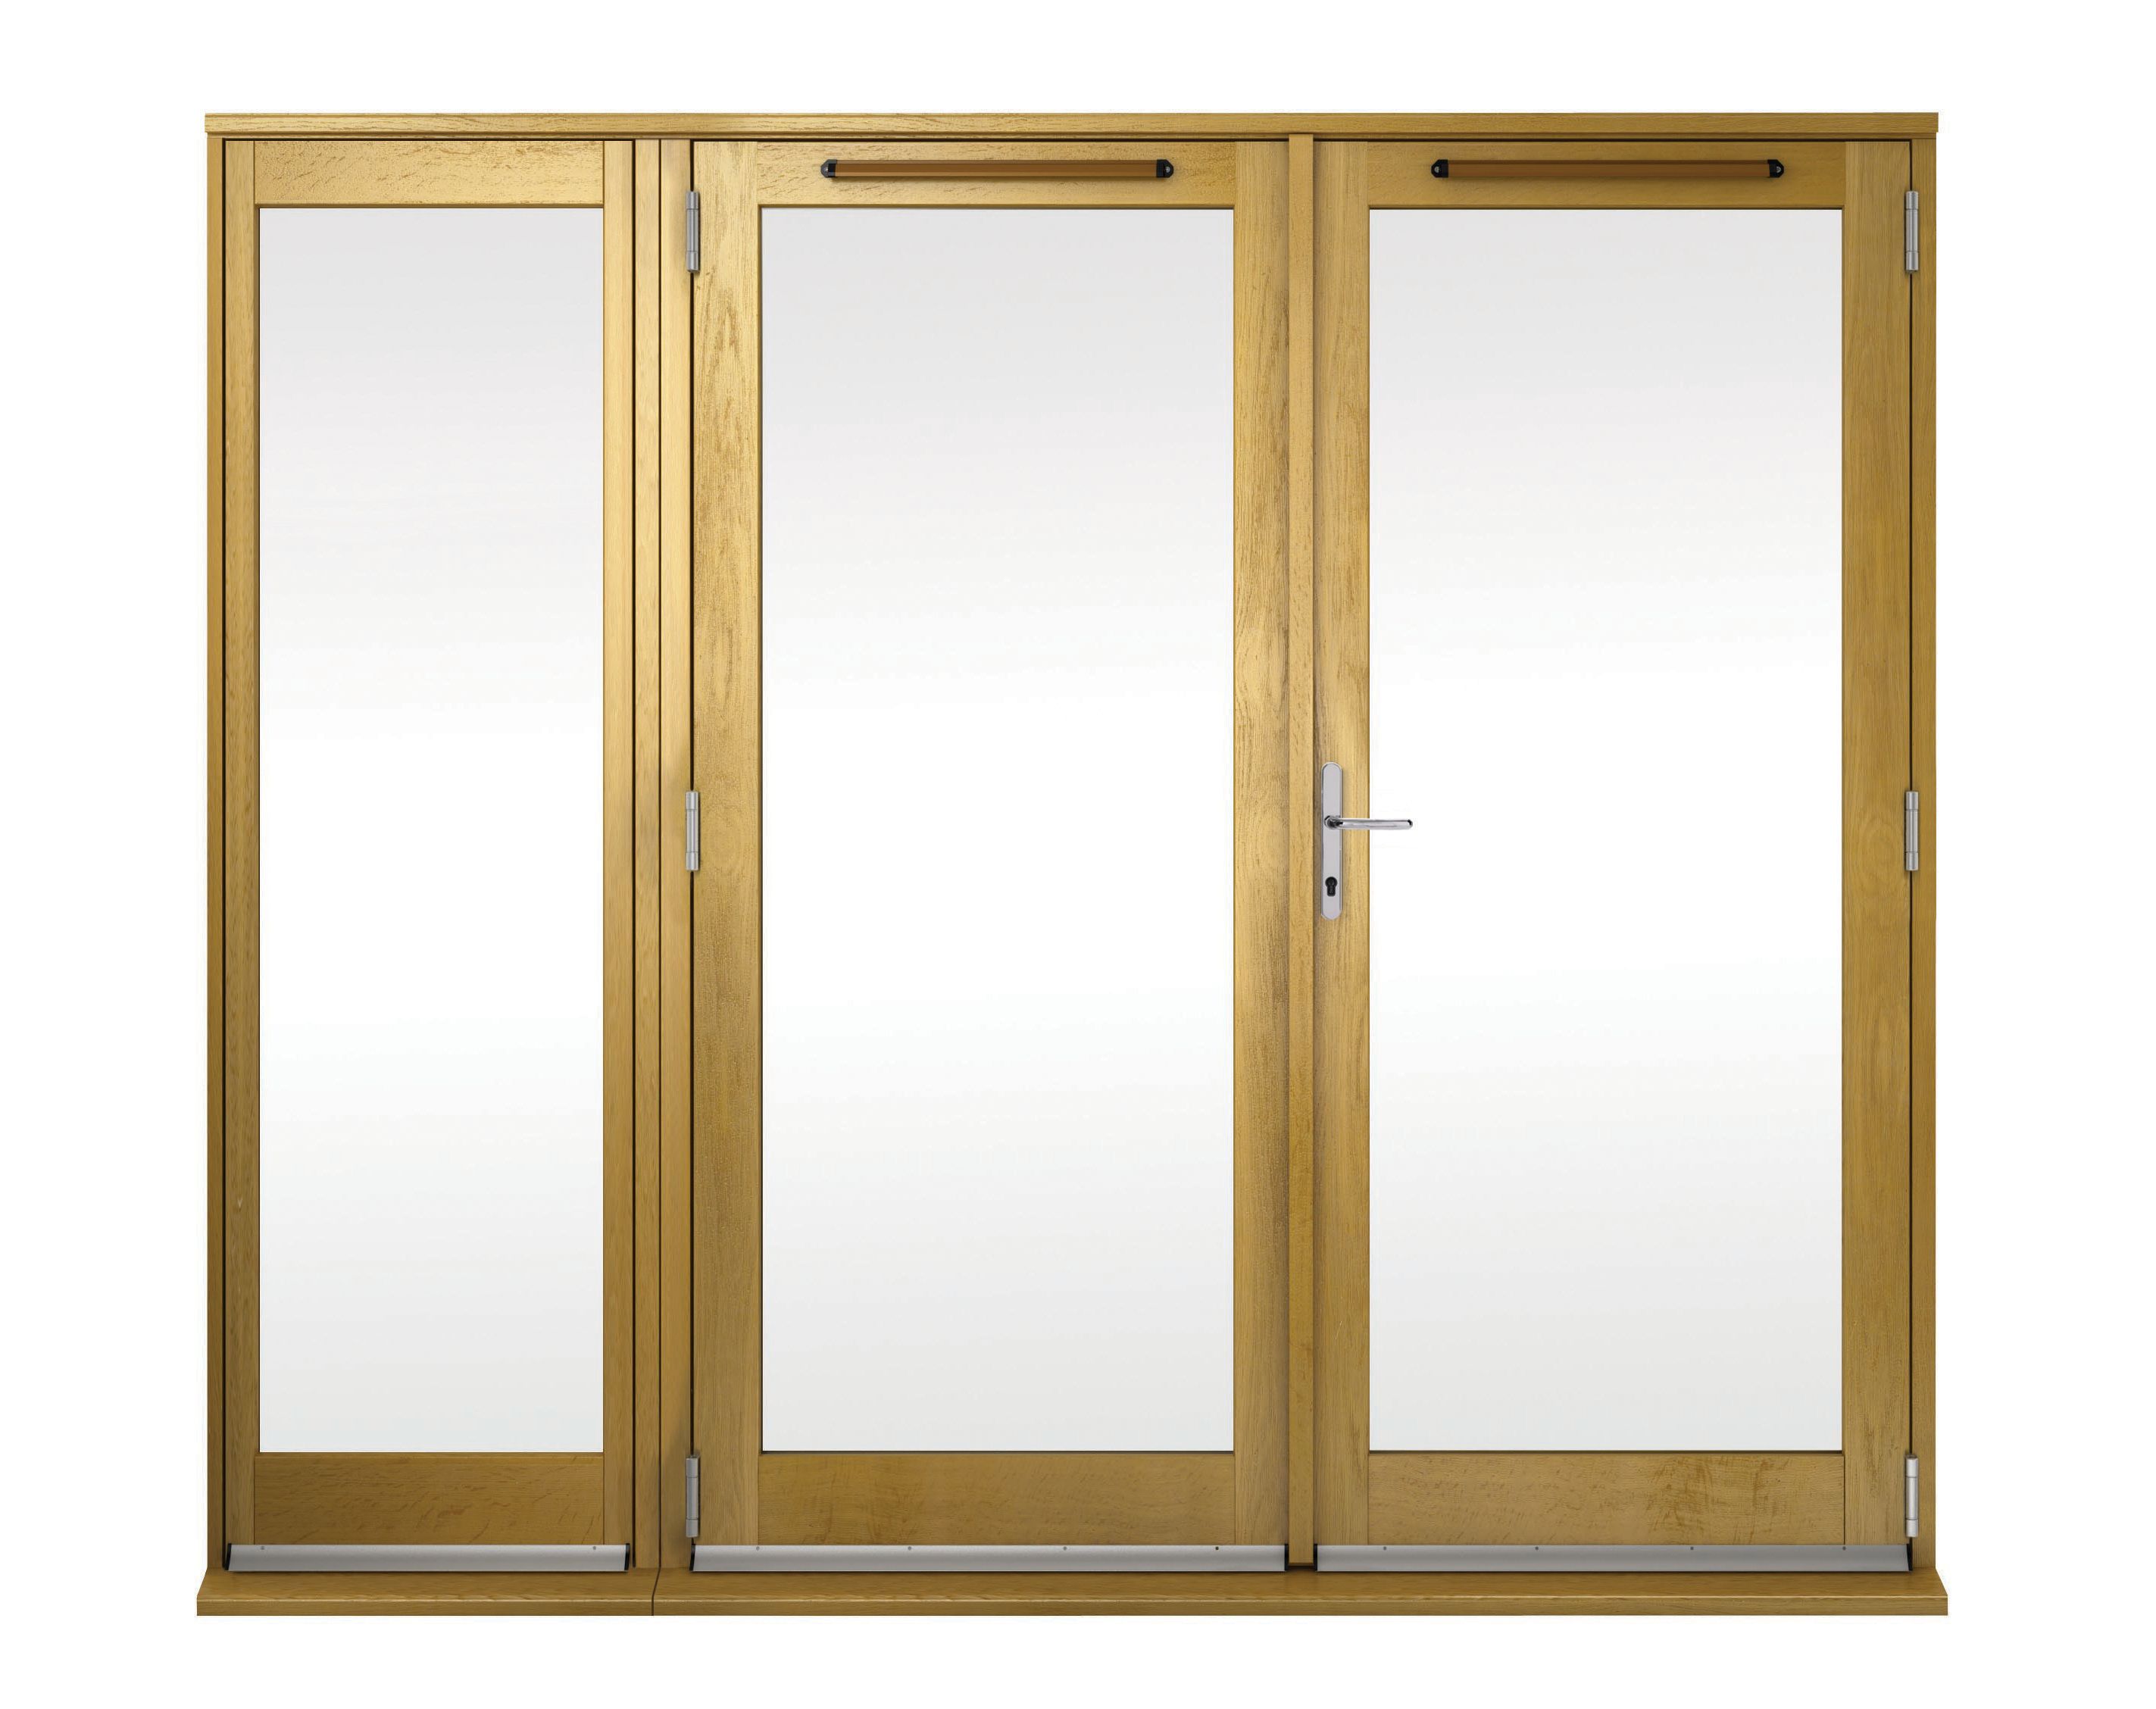 Image of Wickes Albery Pattern 10 Solid Oak Laminate French Doors 7ft with 1 Side Lite 600mm